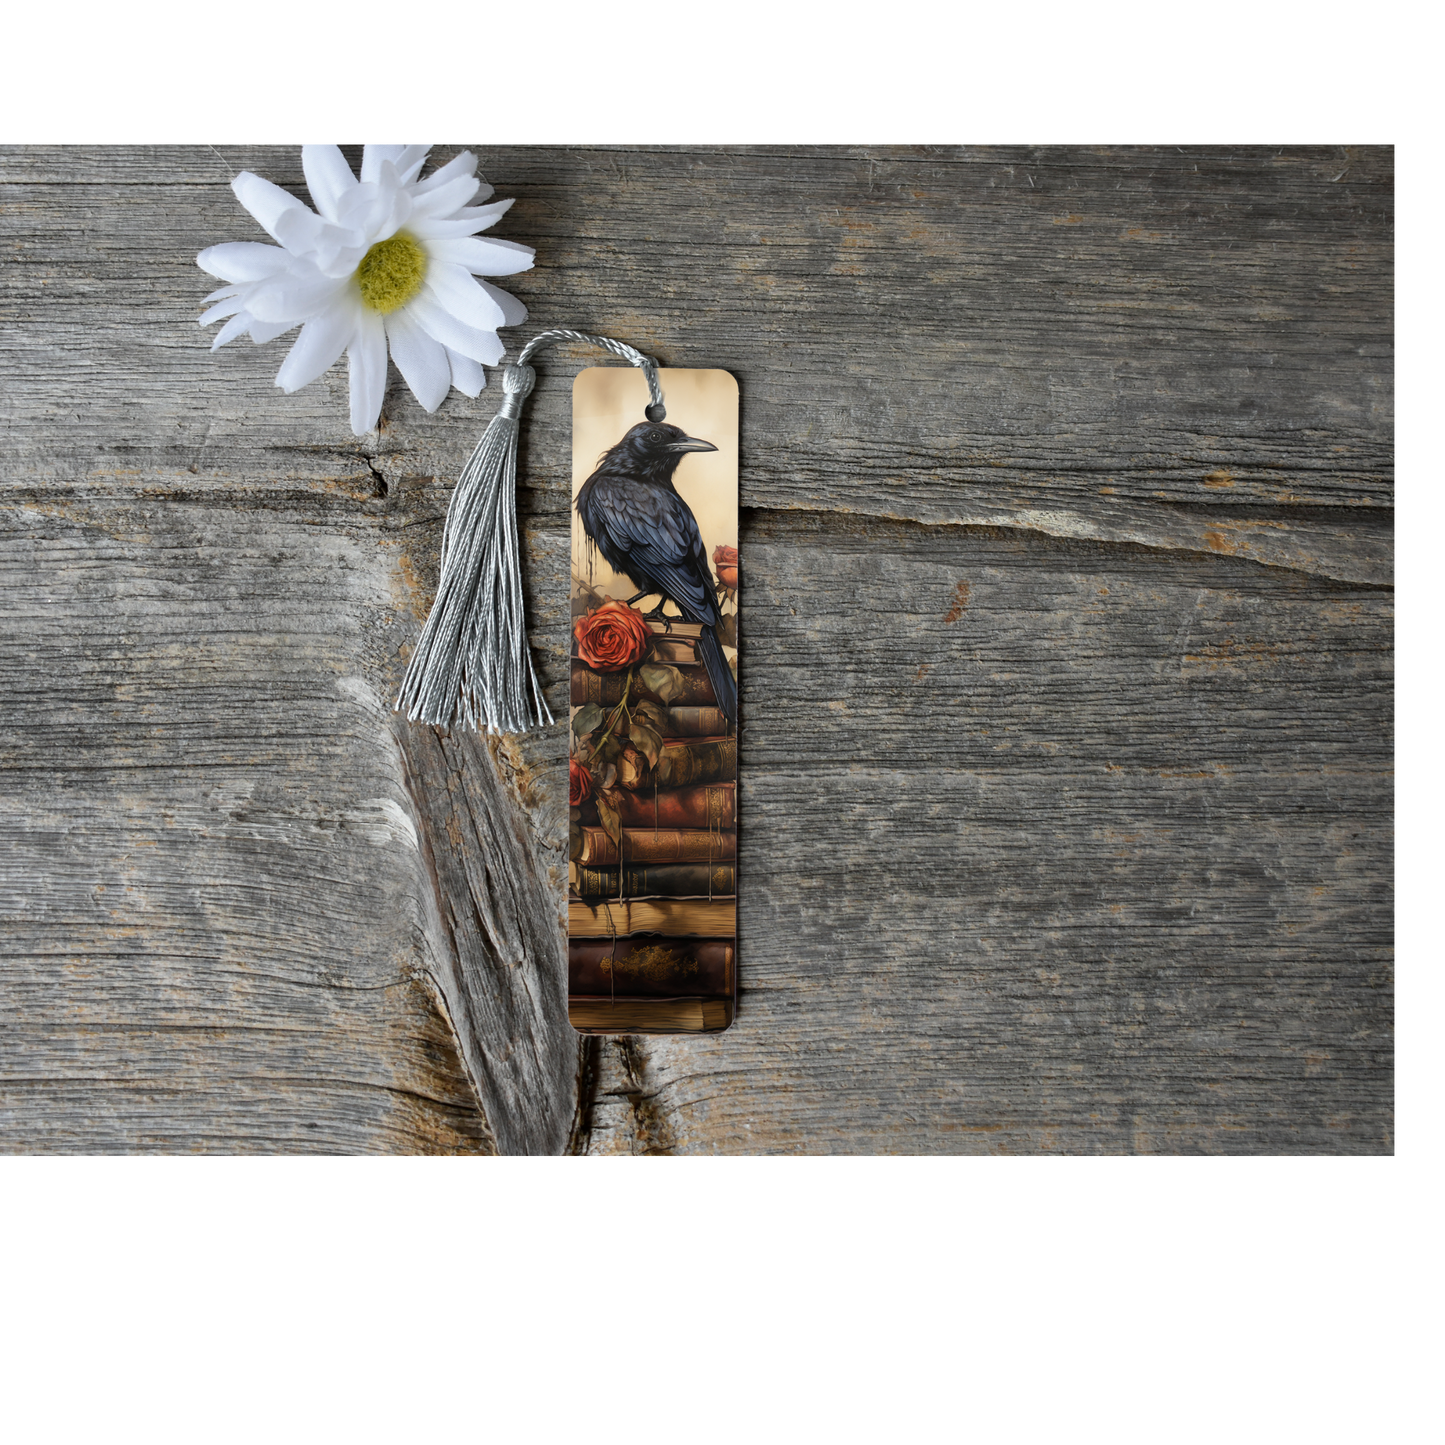 Bird on Books Aluminium Bookmark with Tassel - Stylish Metal Page Marker for Books and Journals